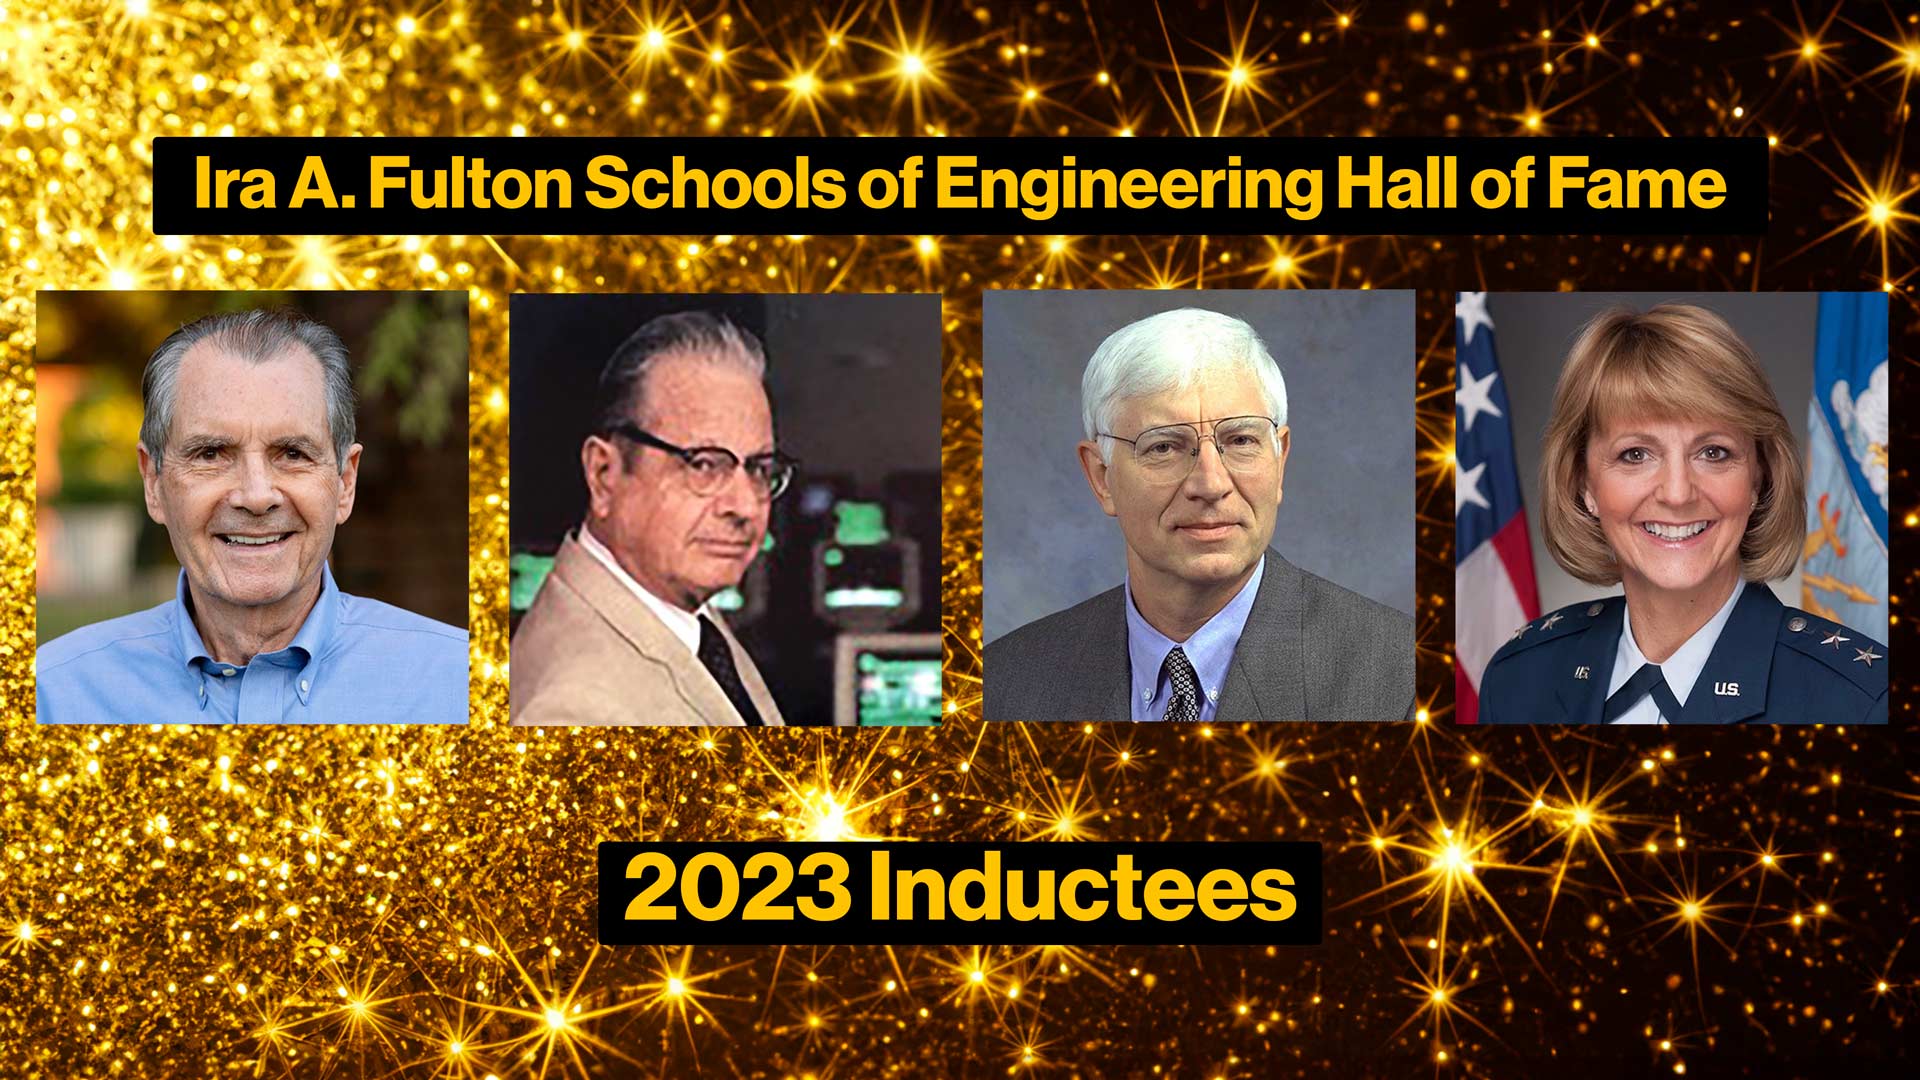 Four new inductees into the Ira A. Fulton Schools of Engineering Hall of Fame – Jon Bayless, George Beakley Jr., Armand Neukermans and Margaret Woodward